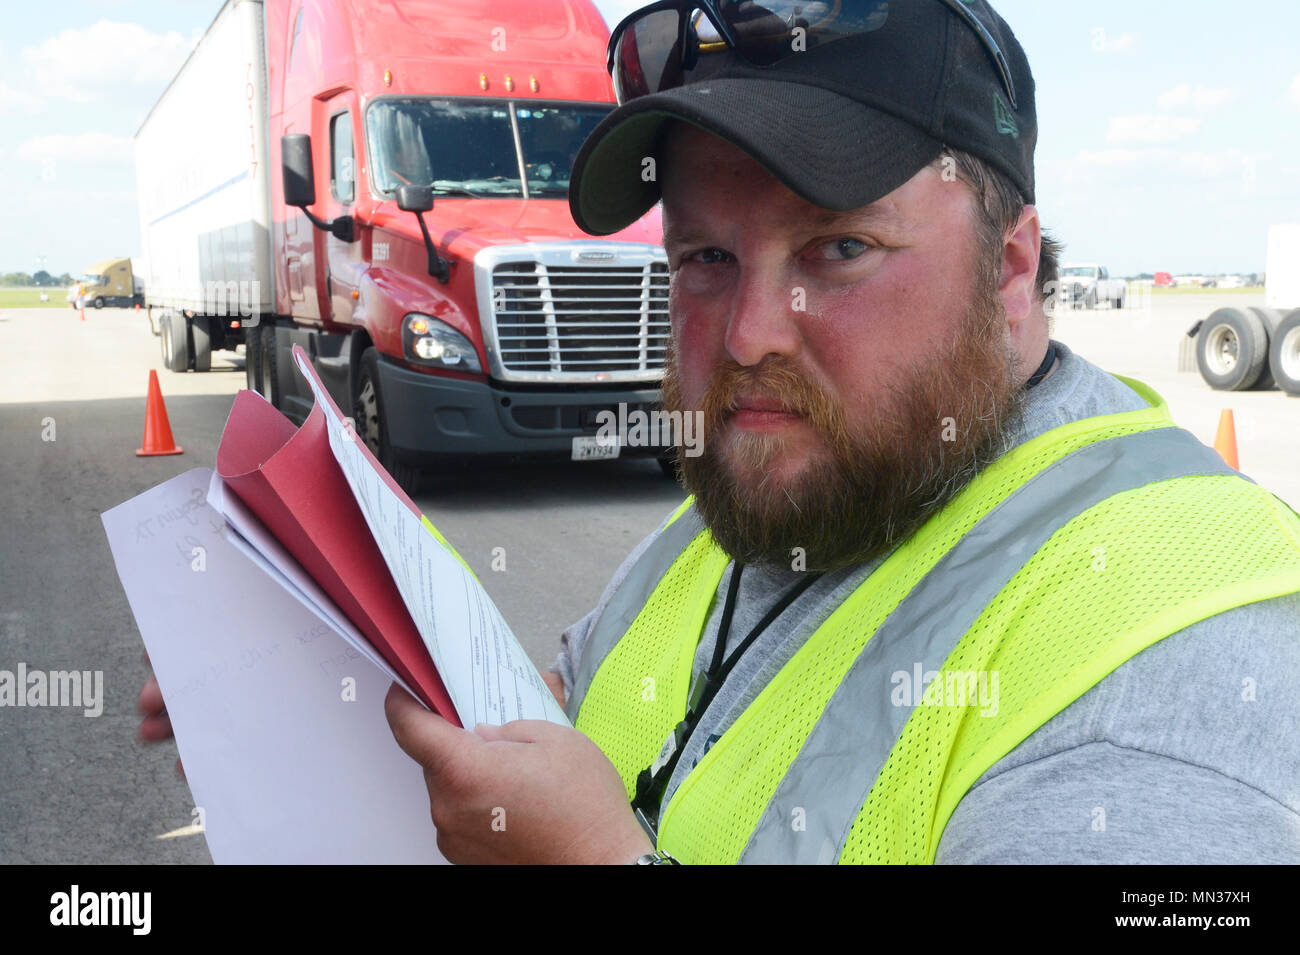 Matt Mikkola, a Federal Emergency Management Agency reserve receiving and distribution manager, inspects the bill of lading from a truck at JBSA Randolph auxiliary airfield, Seguin, Texas, August 30, 2017.  Mikkola, from Calumet Mich., is supporting disaster relief effort for a category 4 hurricane that had 130 mph winds as it made landfall, August 25, 2017.  Days after the hurricane reached the Texas, more than 50 inches of rain flooded the coastal region. (U.S. Air Force Photo by Tech. Sgt. Chad Chisholm/Released) Stock Photo